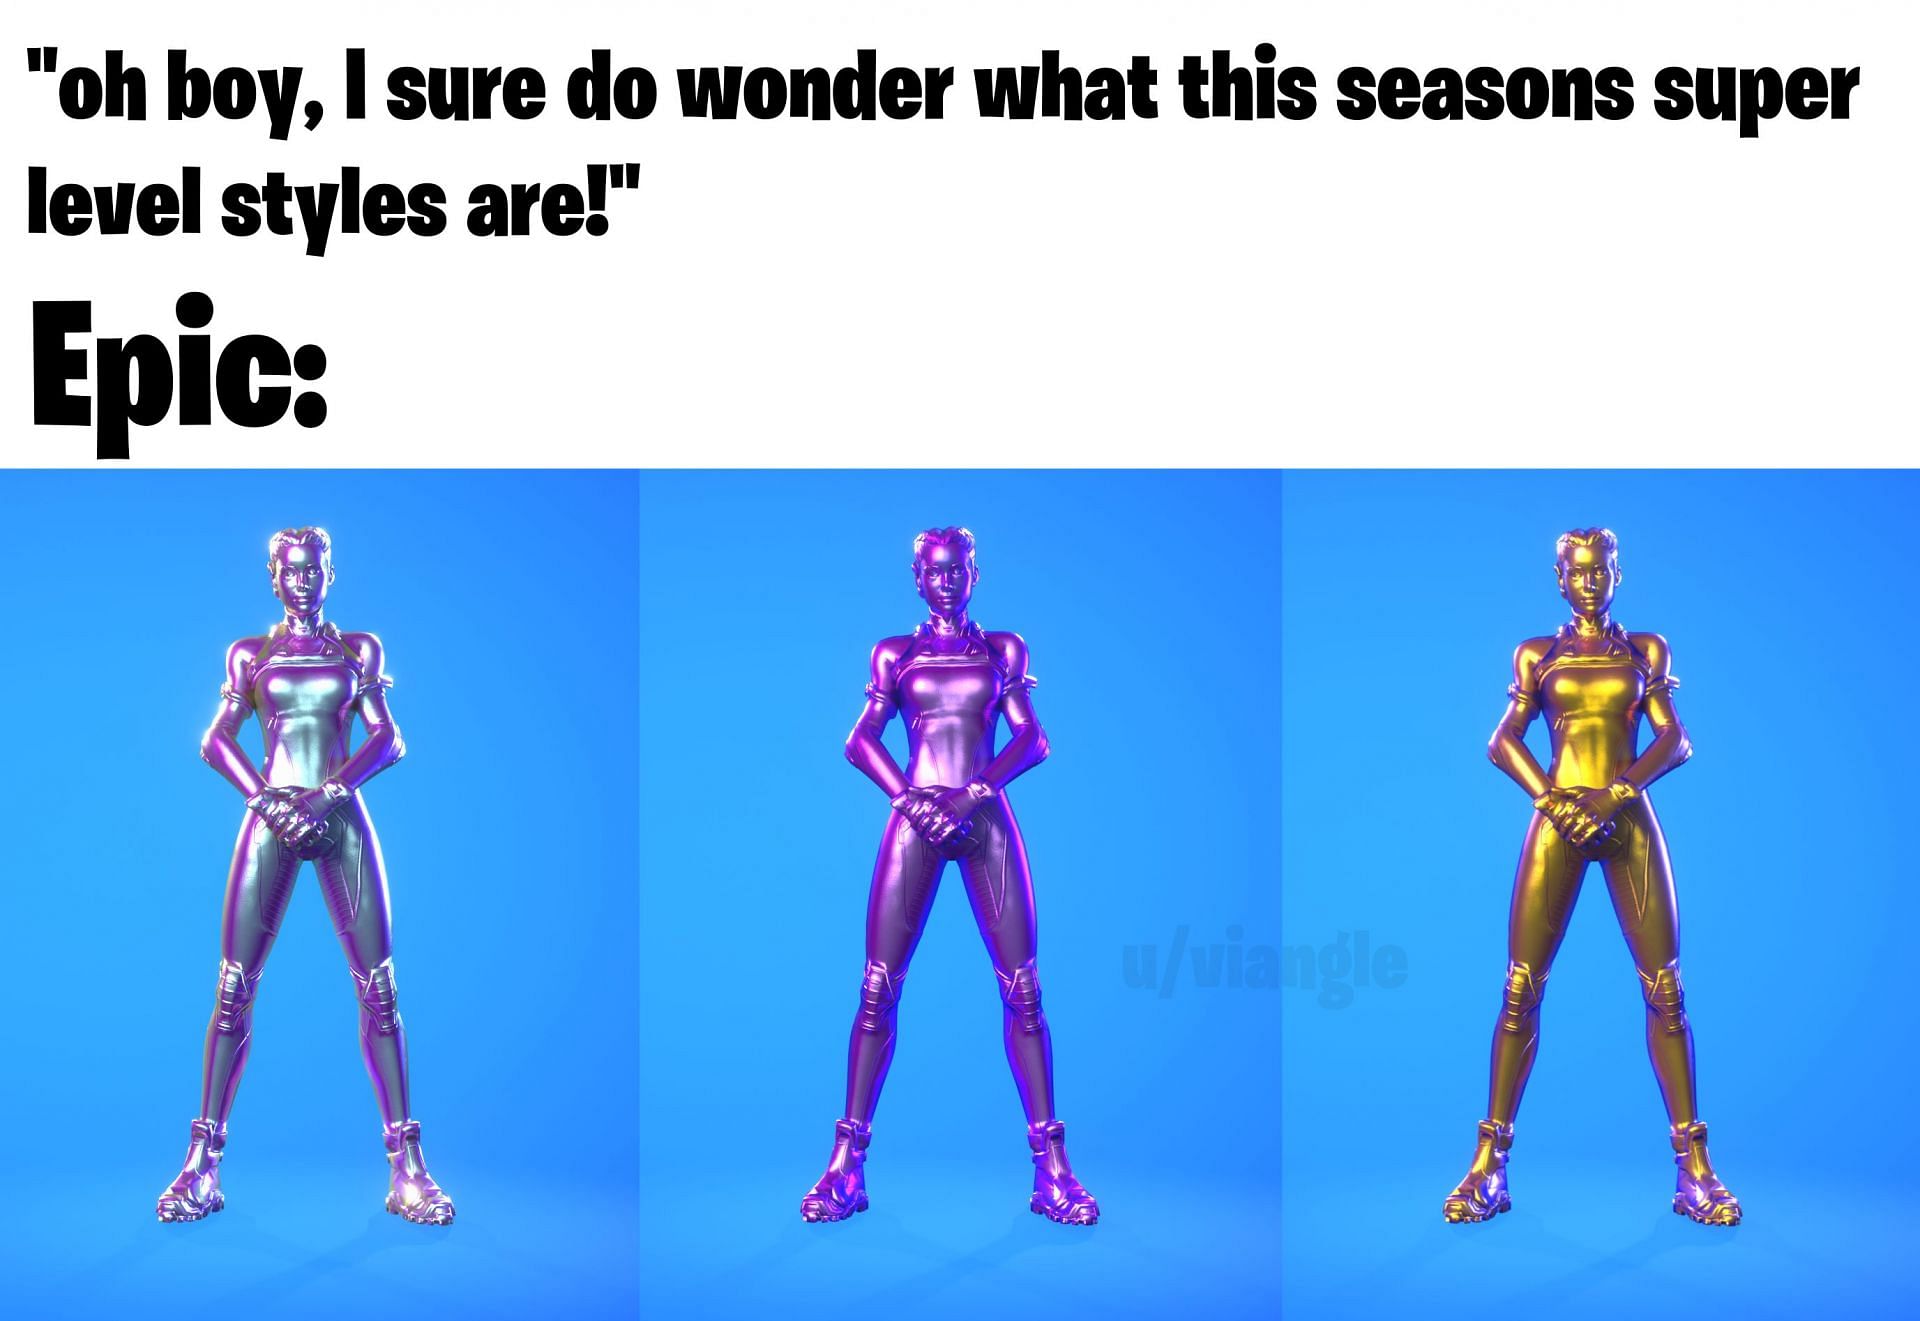 Players are suspecting that super styles for Fortnite Chapter 3 Season 4 will look something like this (Image via Reddit/viangle)